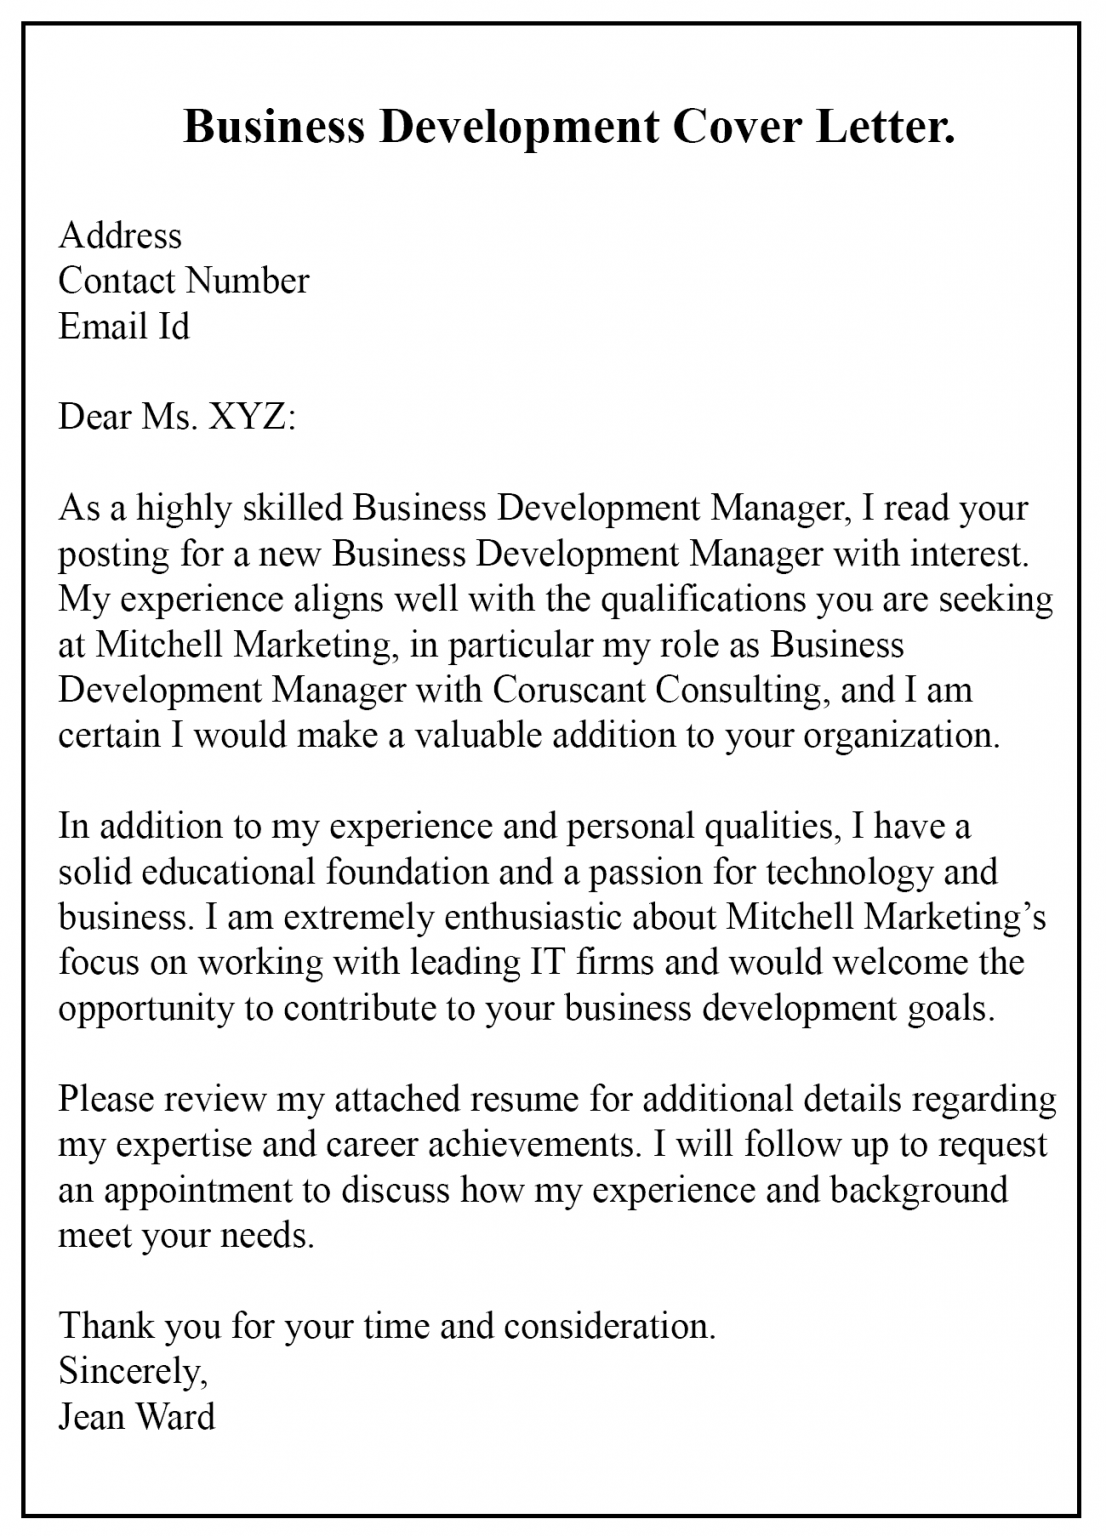 example of cover letter of business development